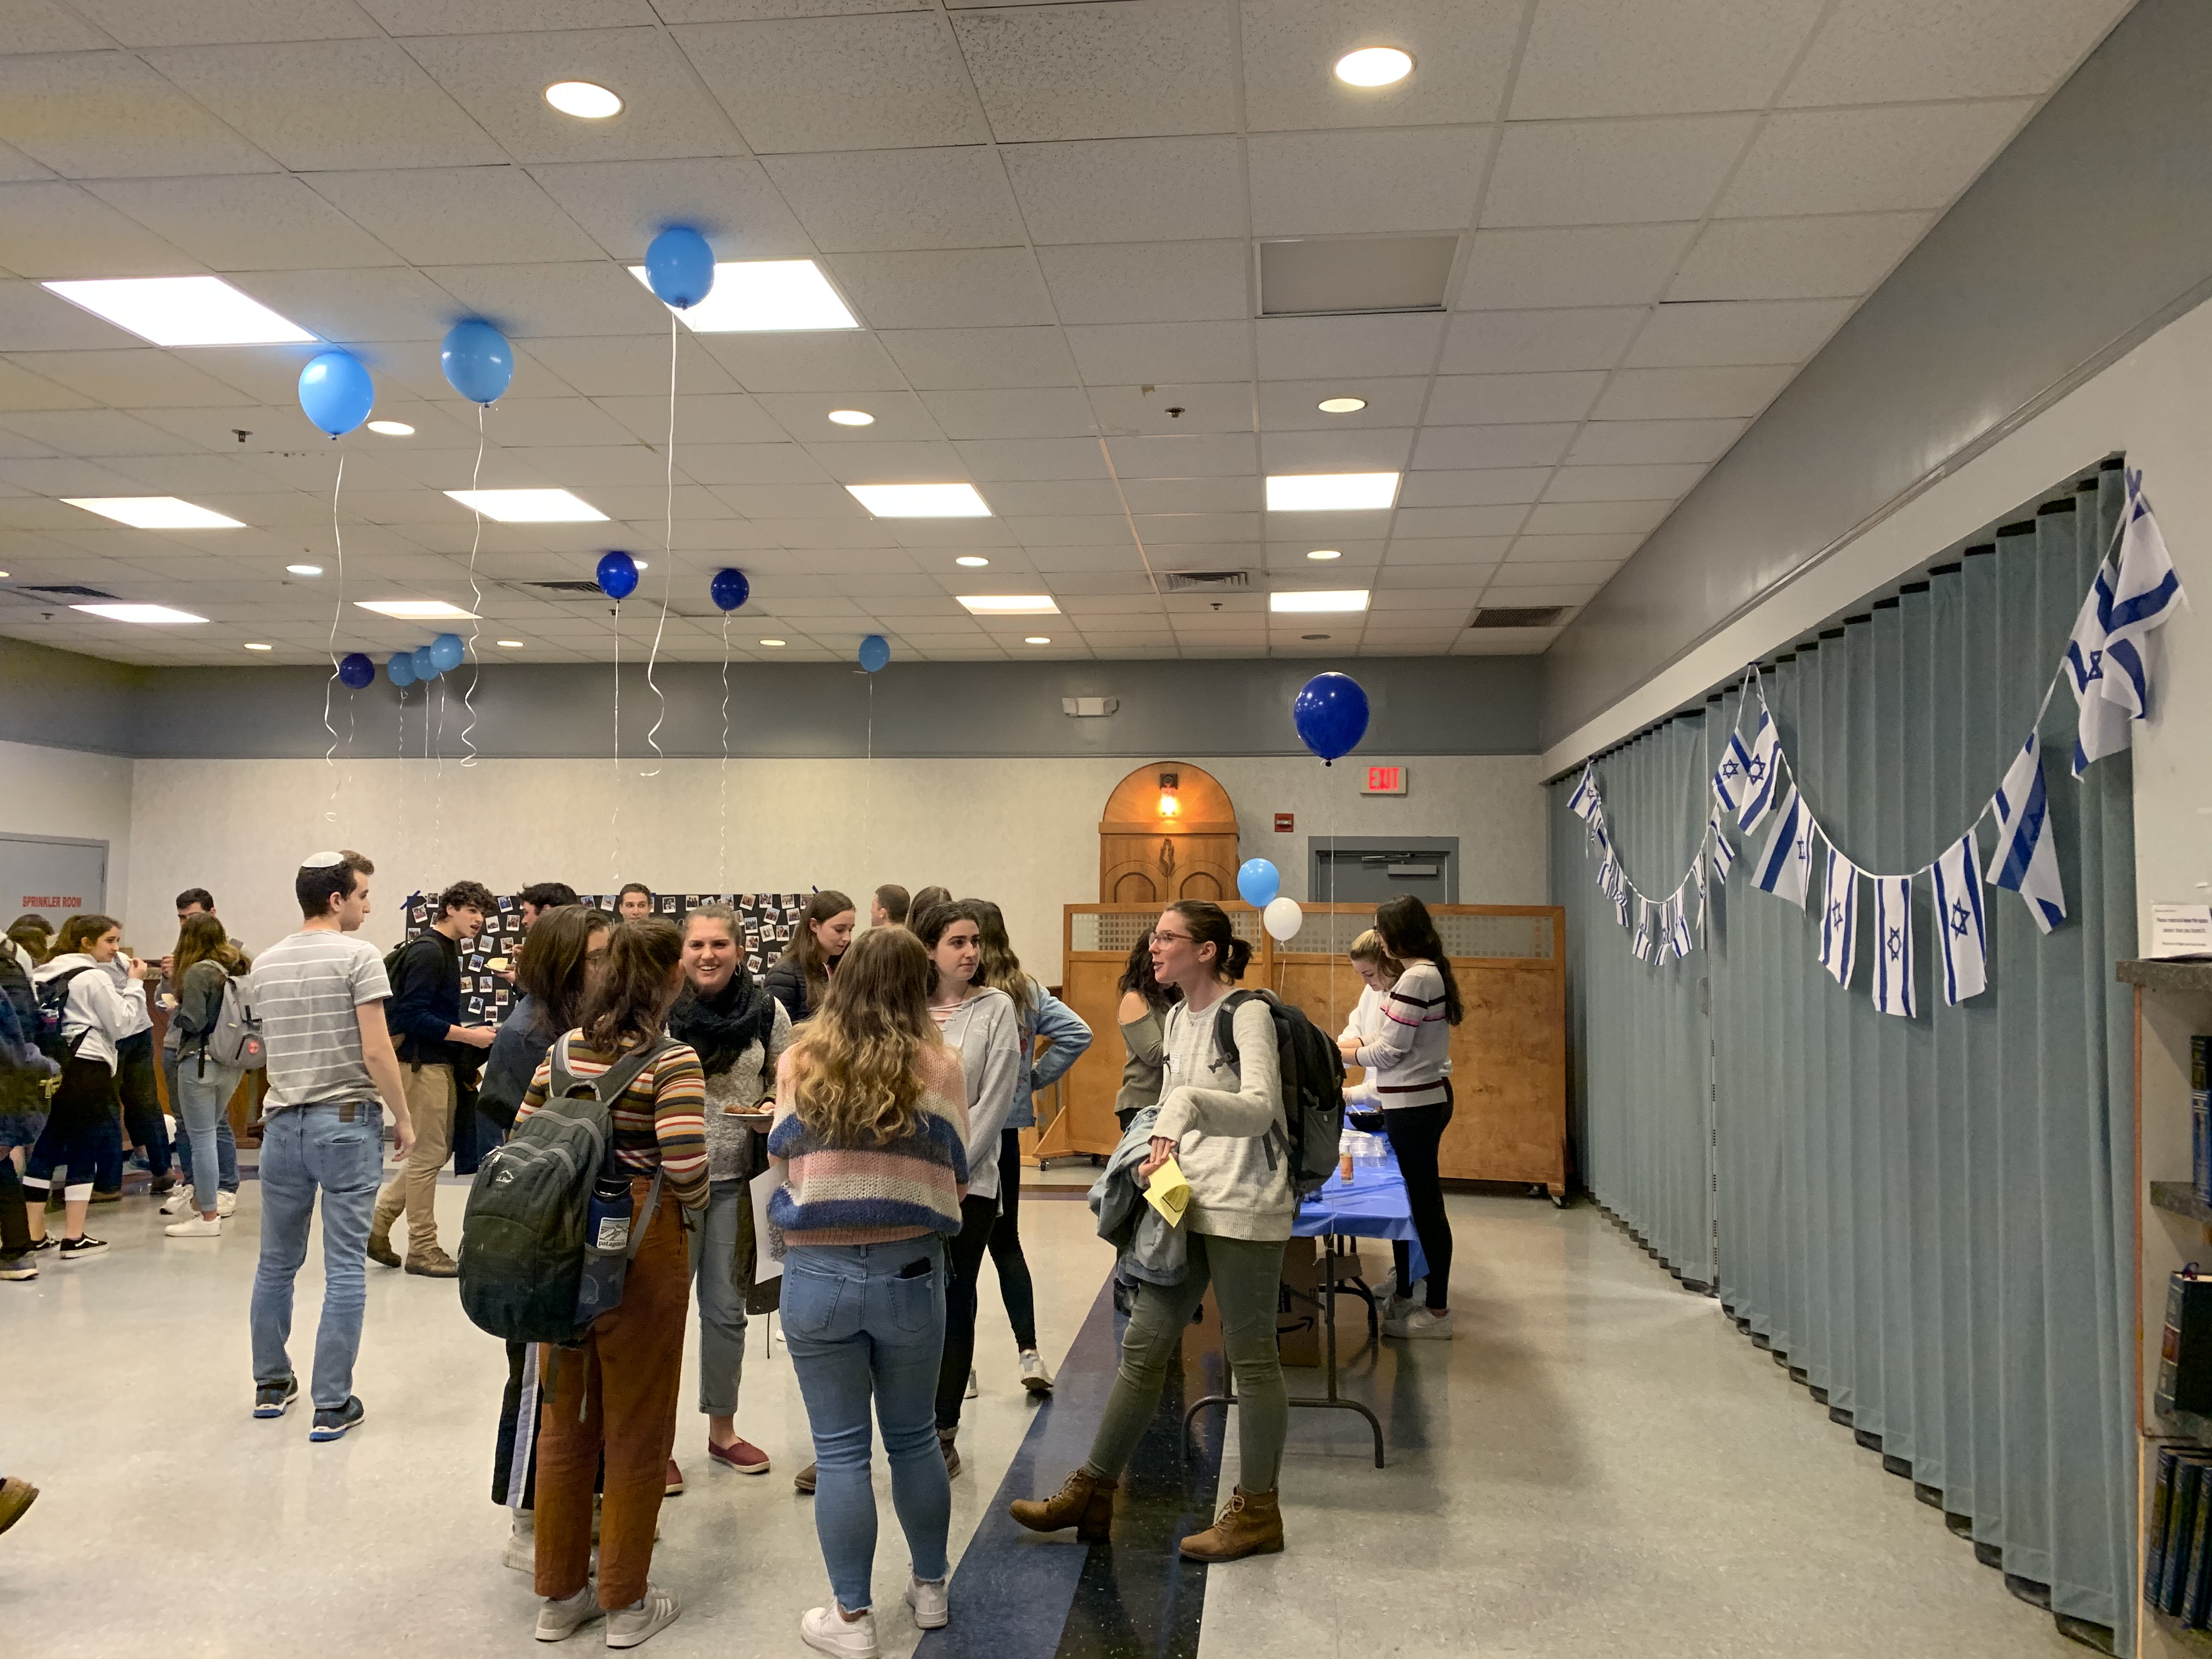 Birthright Israel celebration connects students at Hillel through music, food and Dead Sea salt scrubs